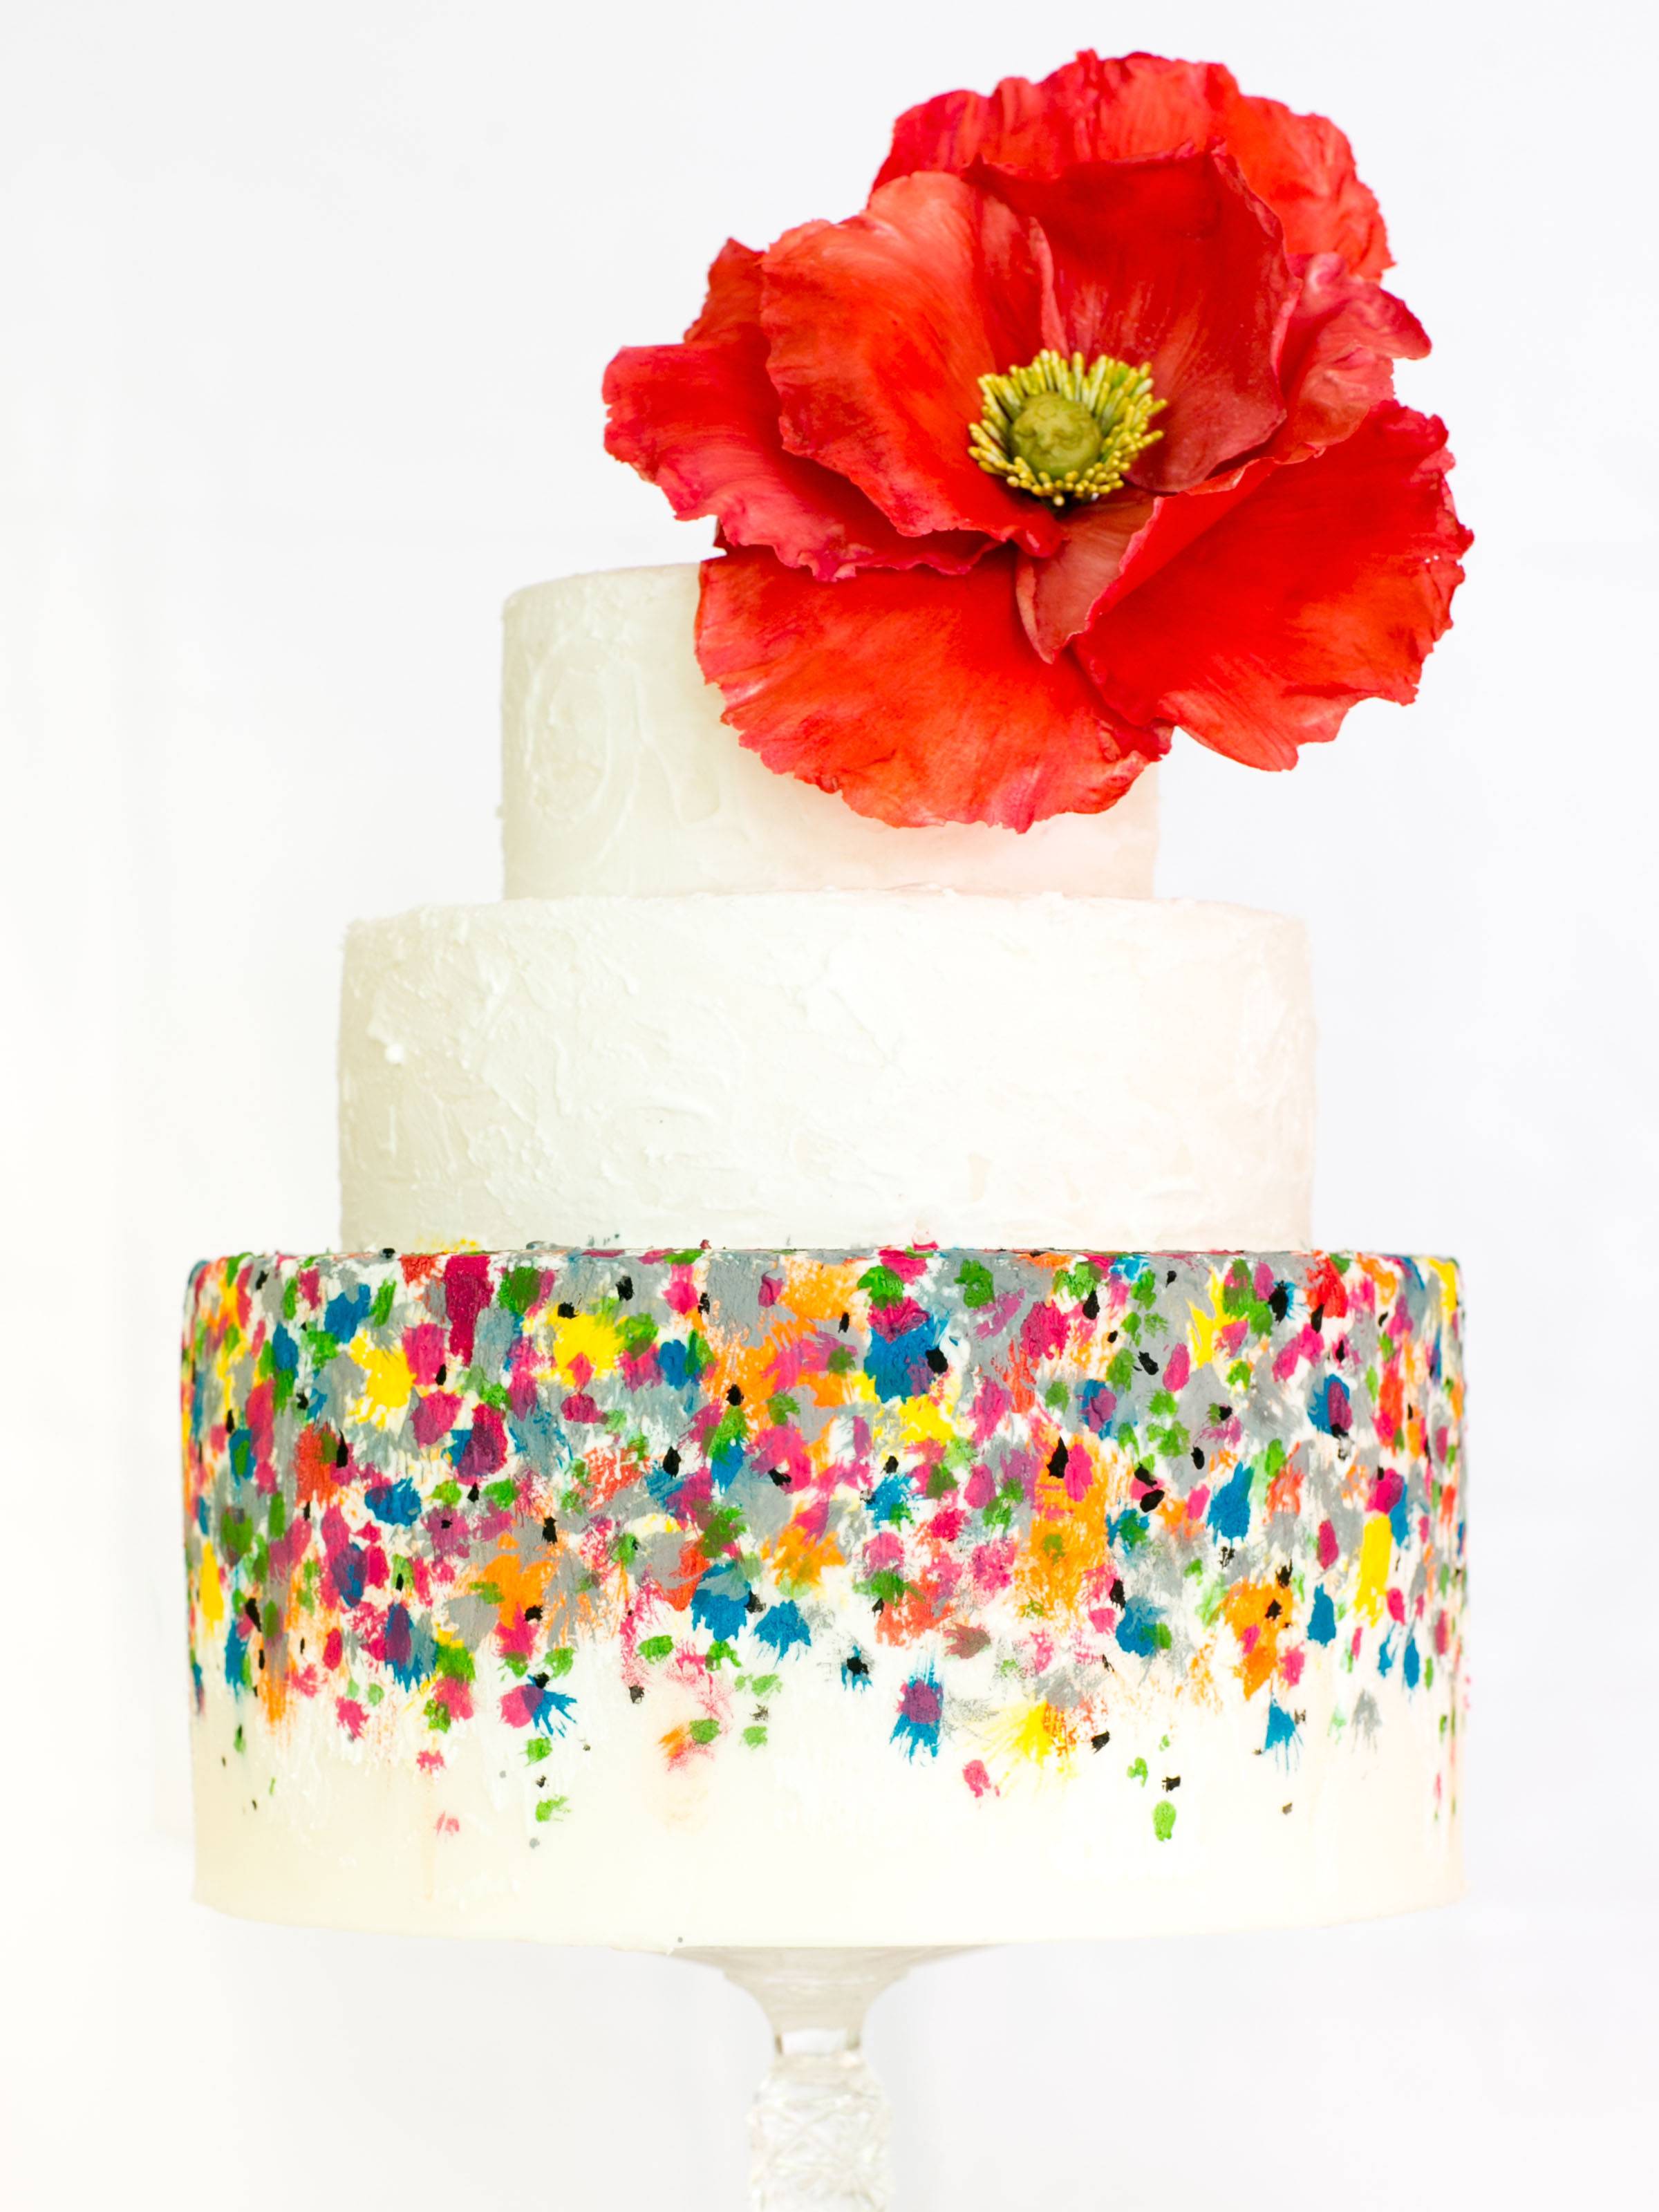 round, three-tiered wedding cake with confetti icing and large red poppy cake topper